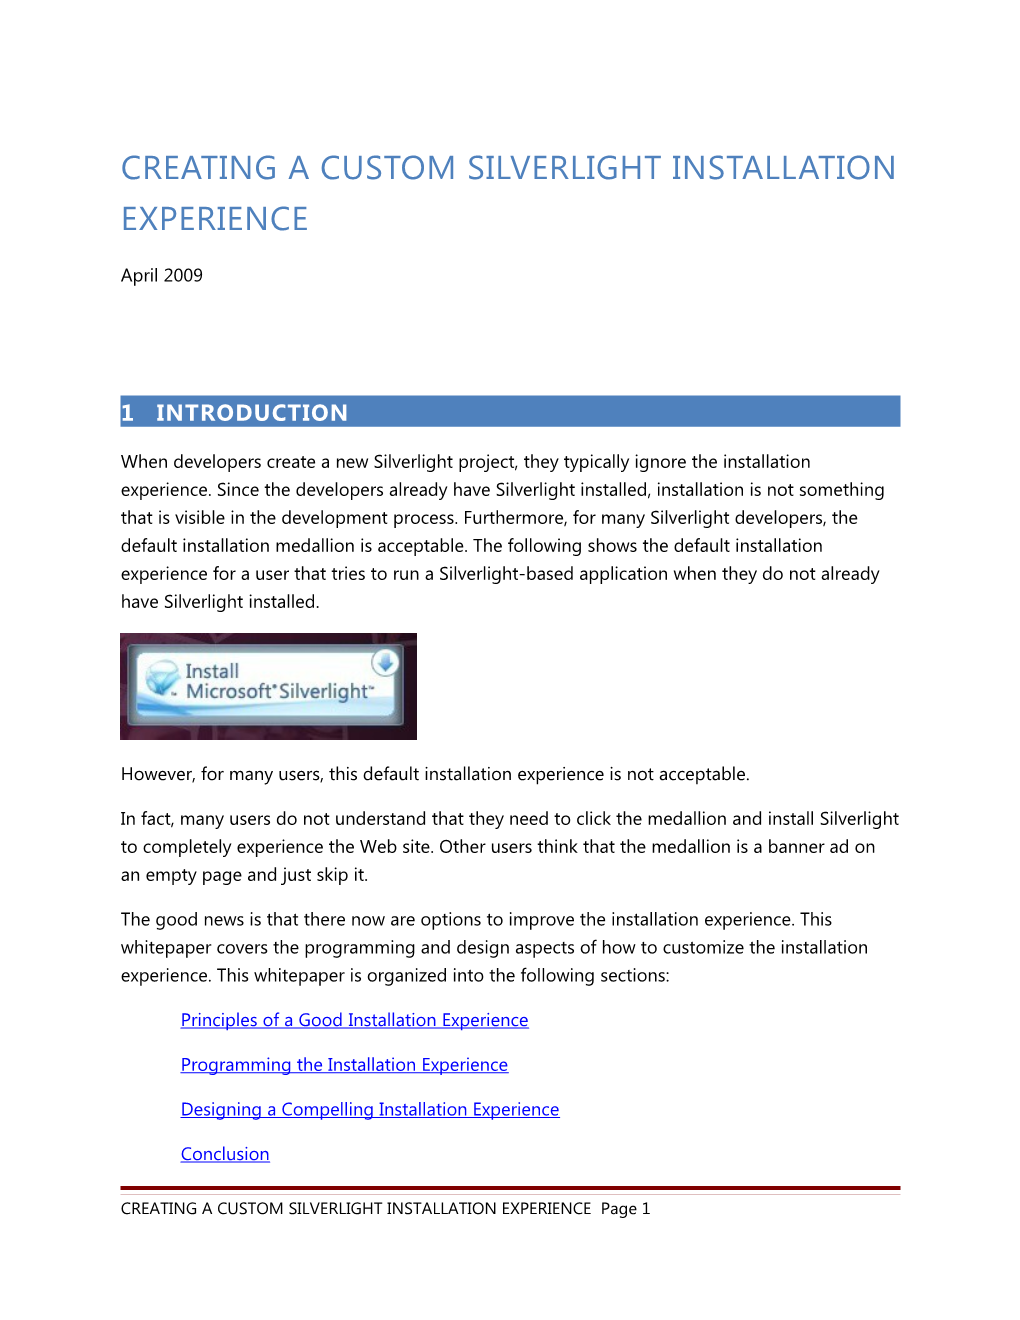 Local Connection Between Silverlight Applications